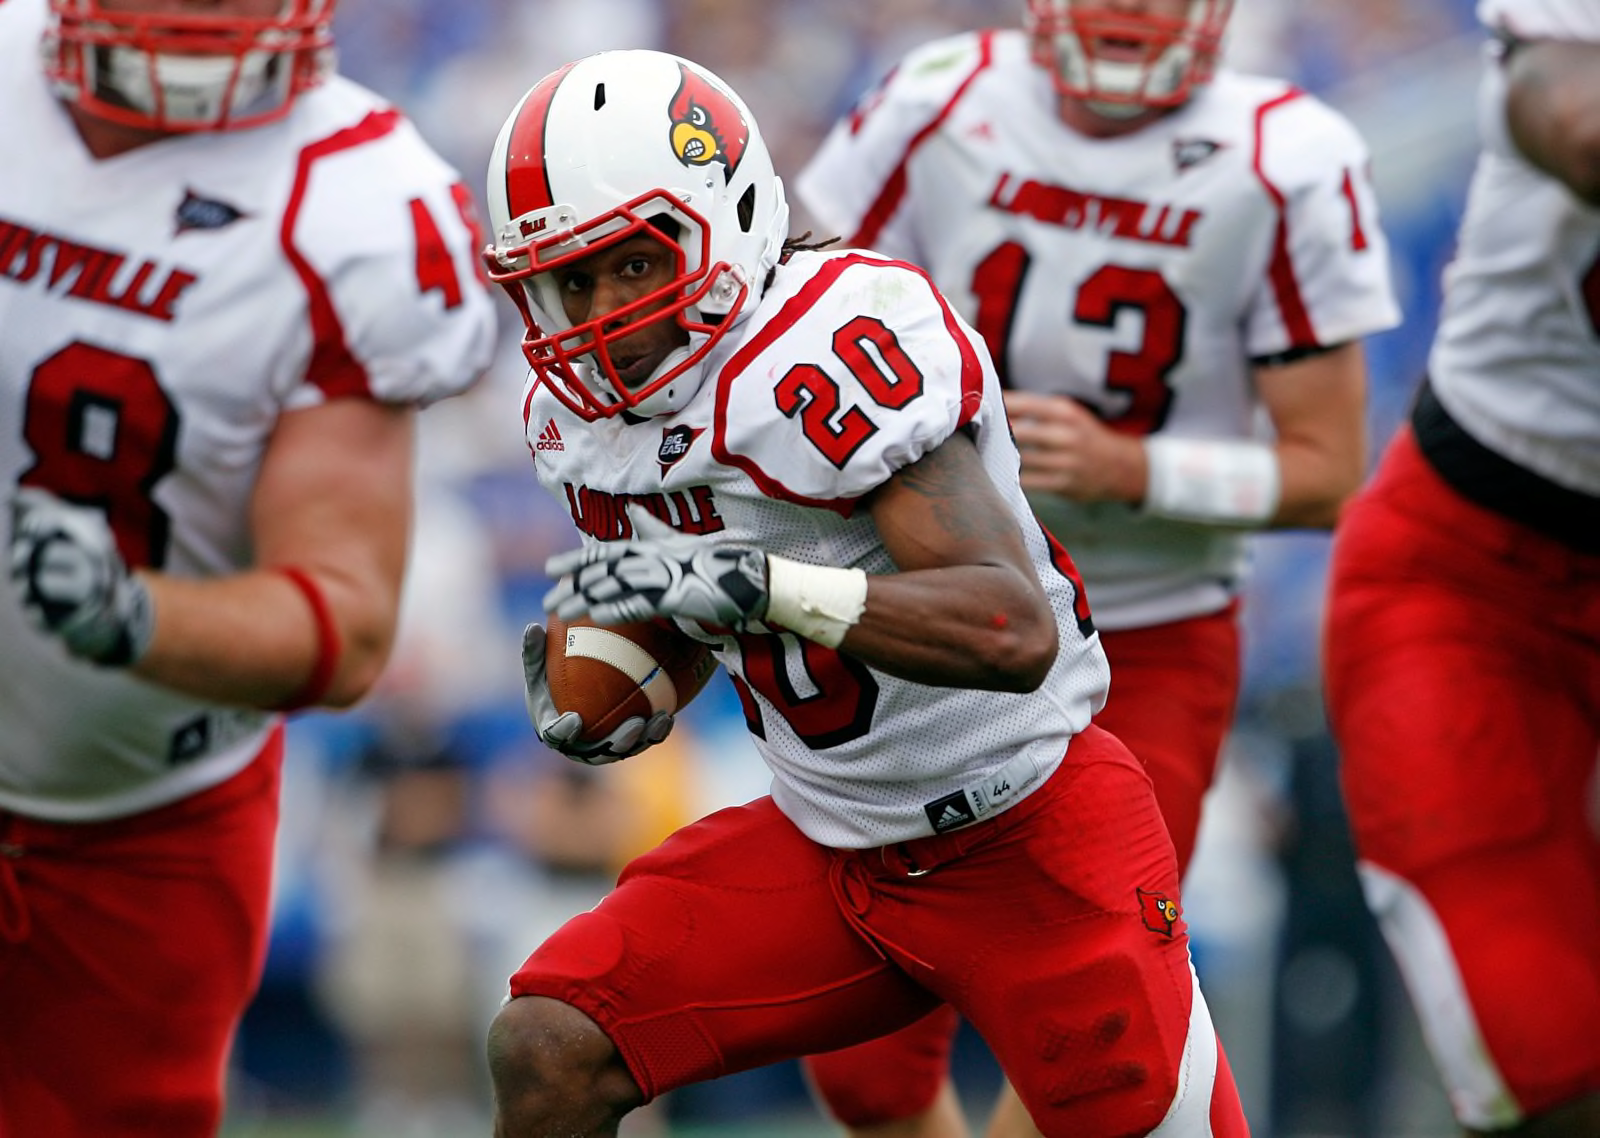 Louisville football: The 50 greatest Cardinals of all time